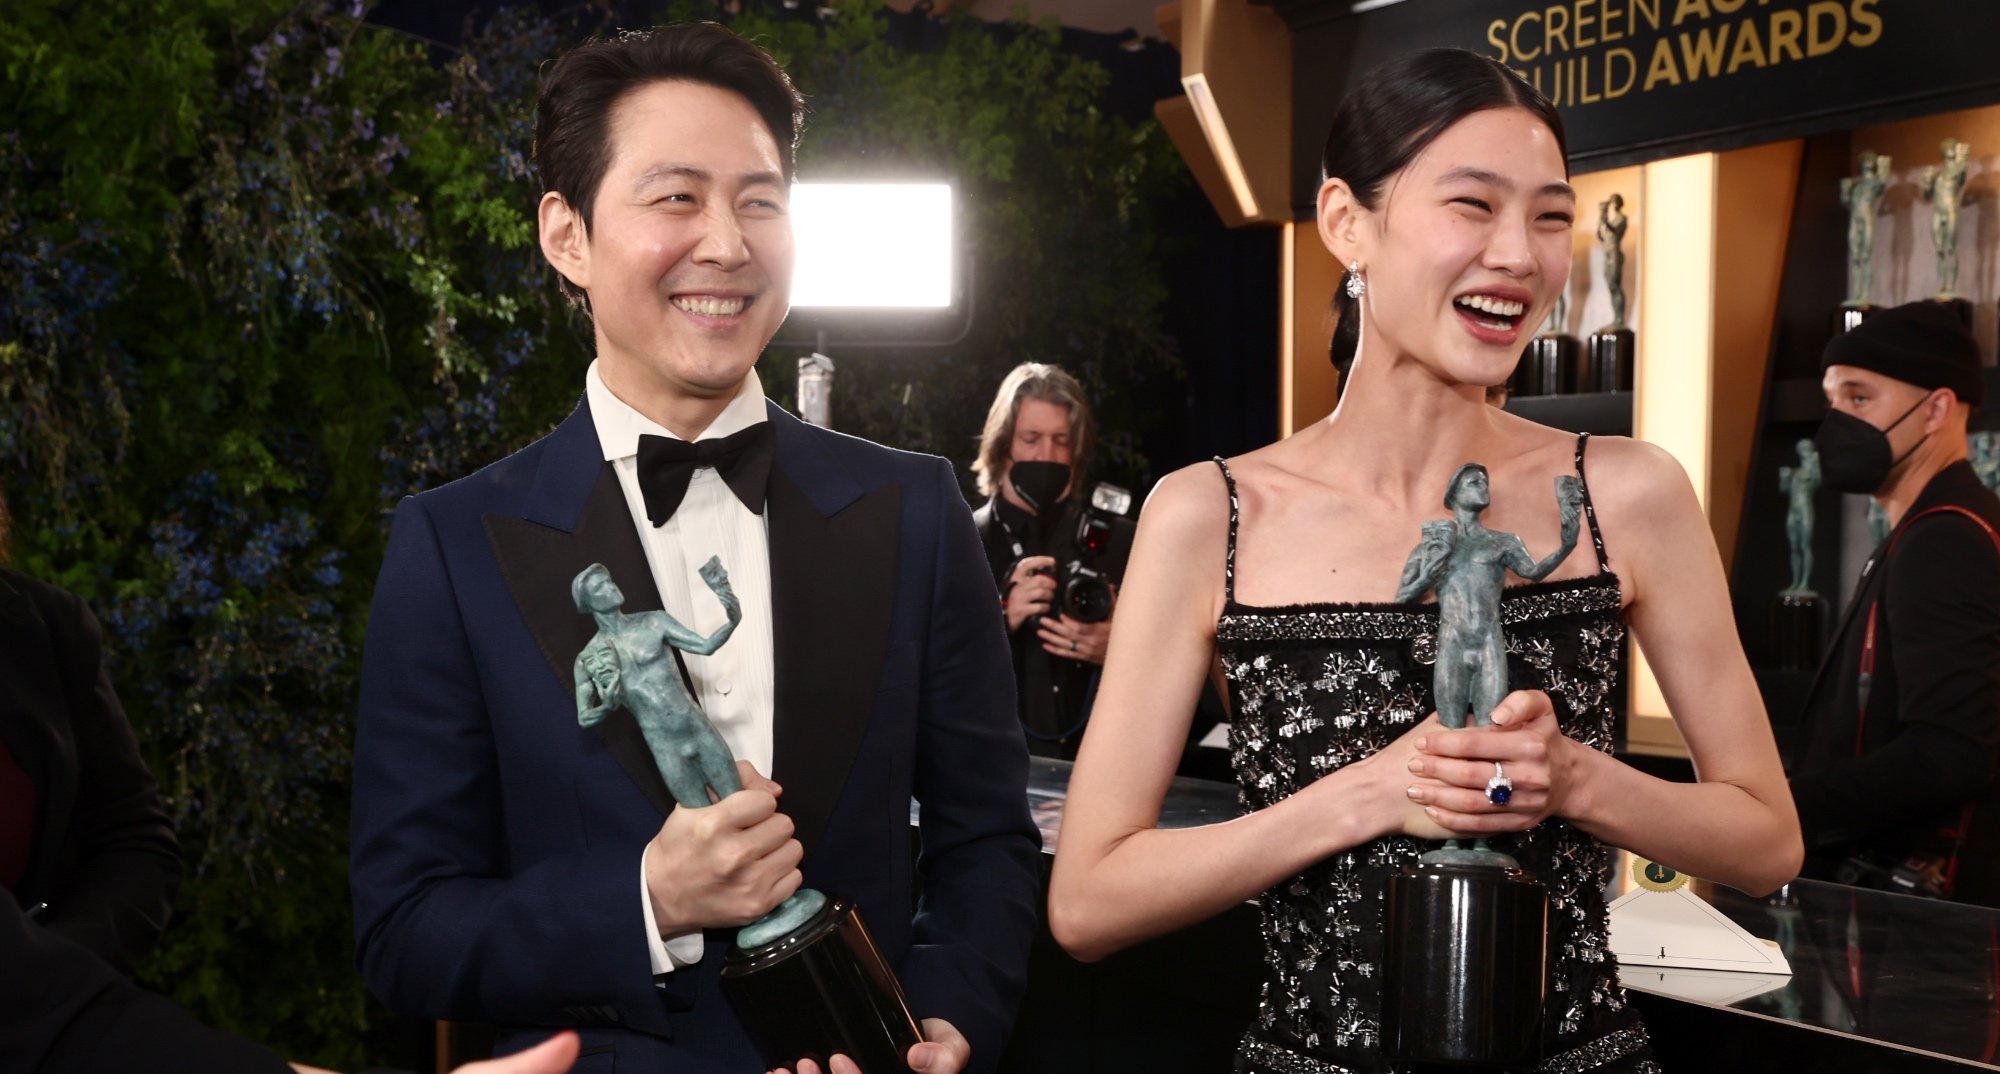 Squid Game' cast make history at SAG Awards 2022 with two acting wins